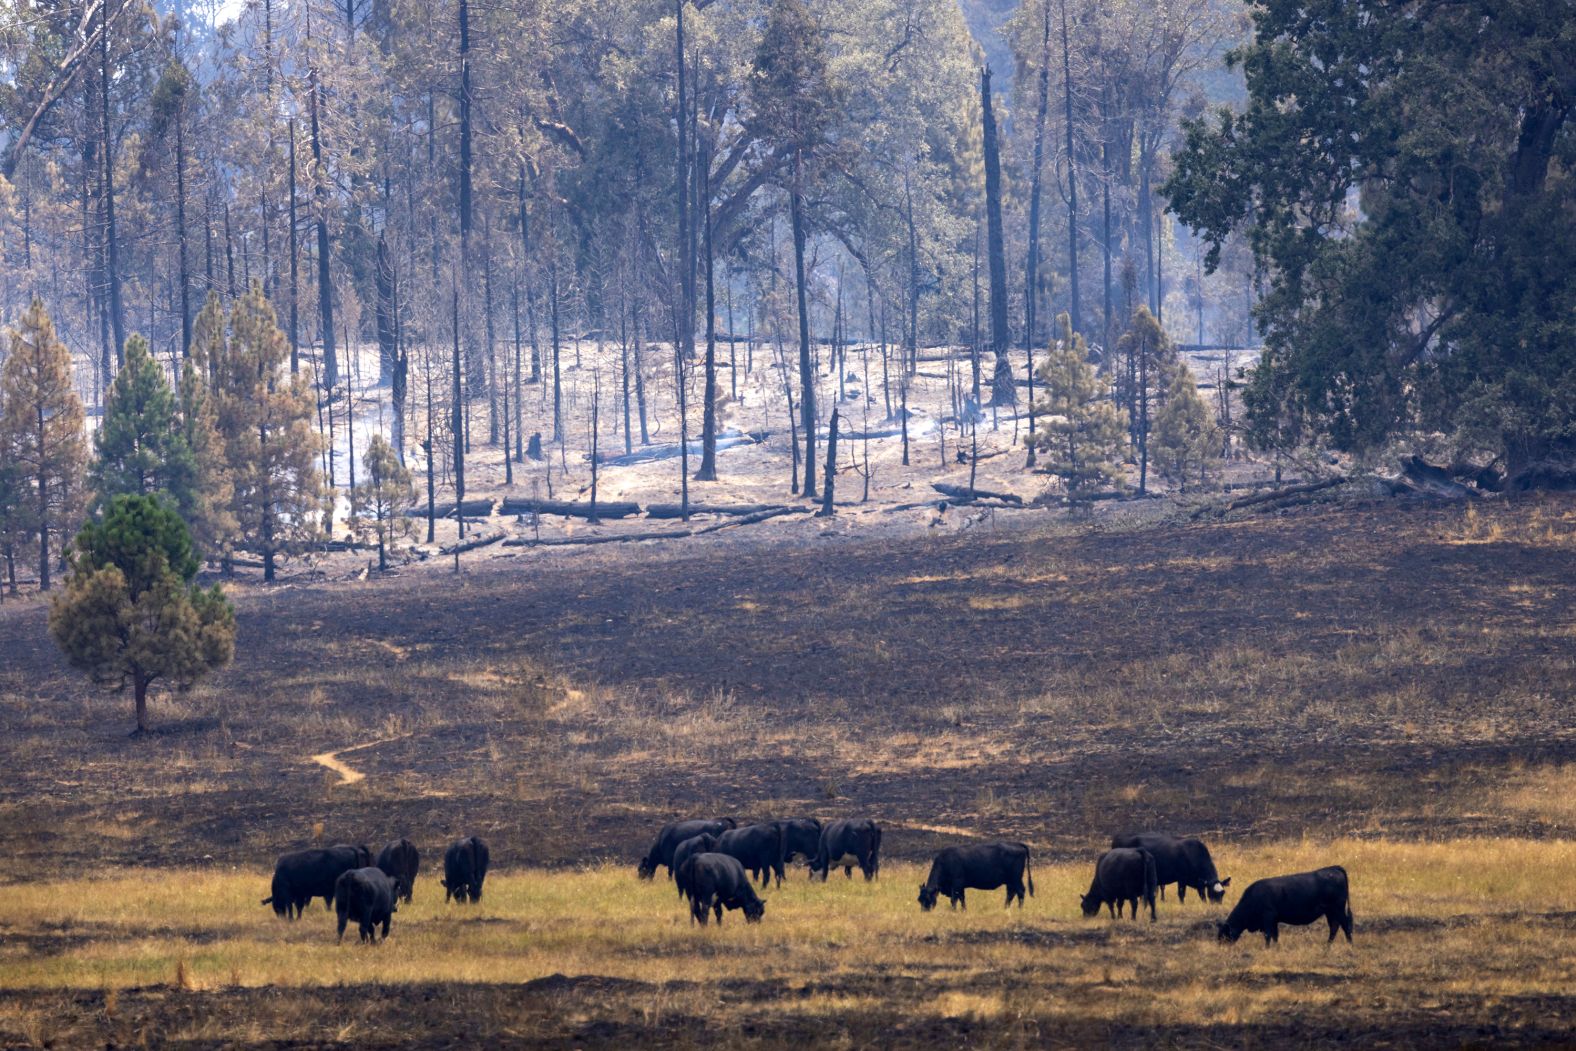 Cattle graze in a meadow surrounded by smoldering tree trunks near Mariposa, California, on Monday.